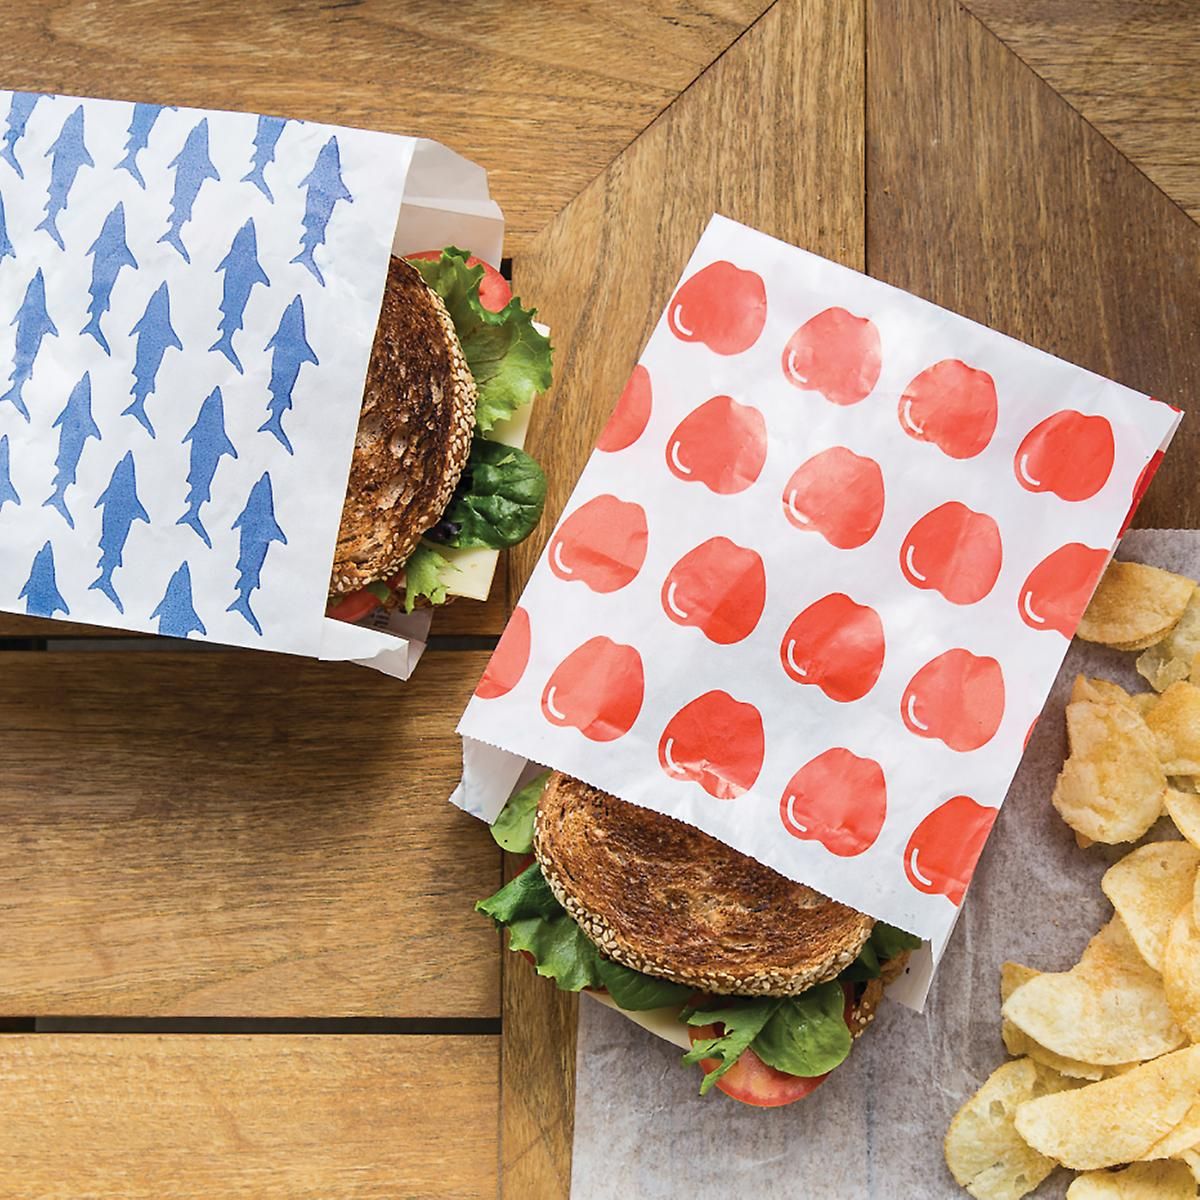 Creative And Practical Uses Of Paper Sandwich Bags Beyond Lunchtime